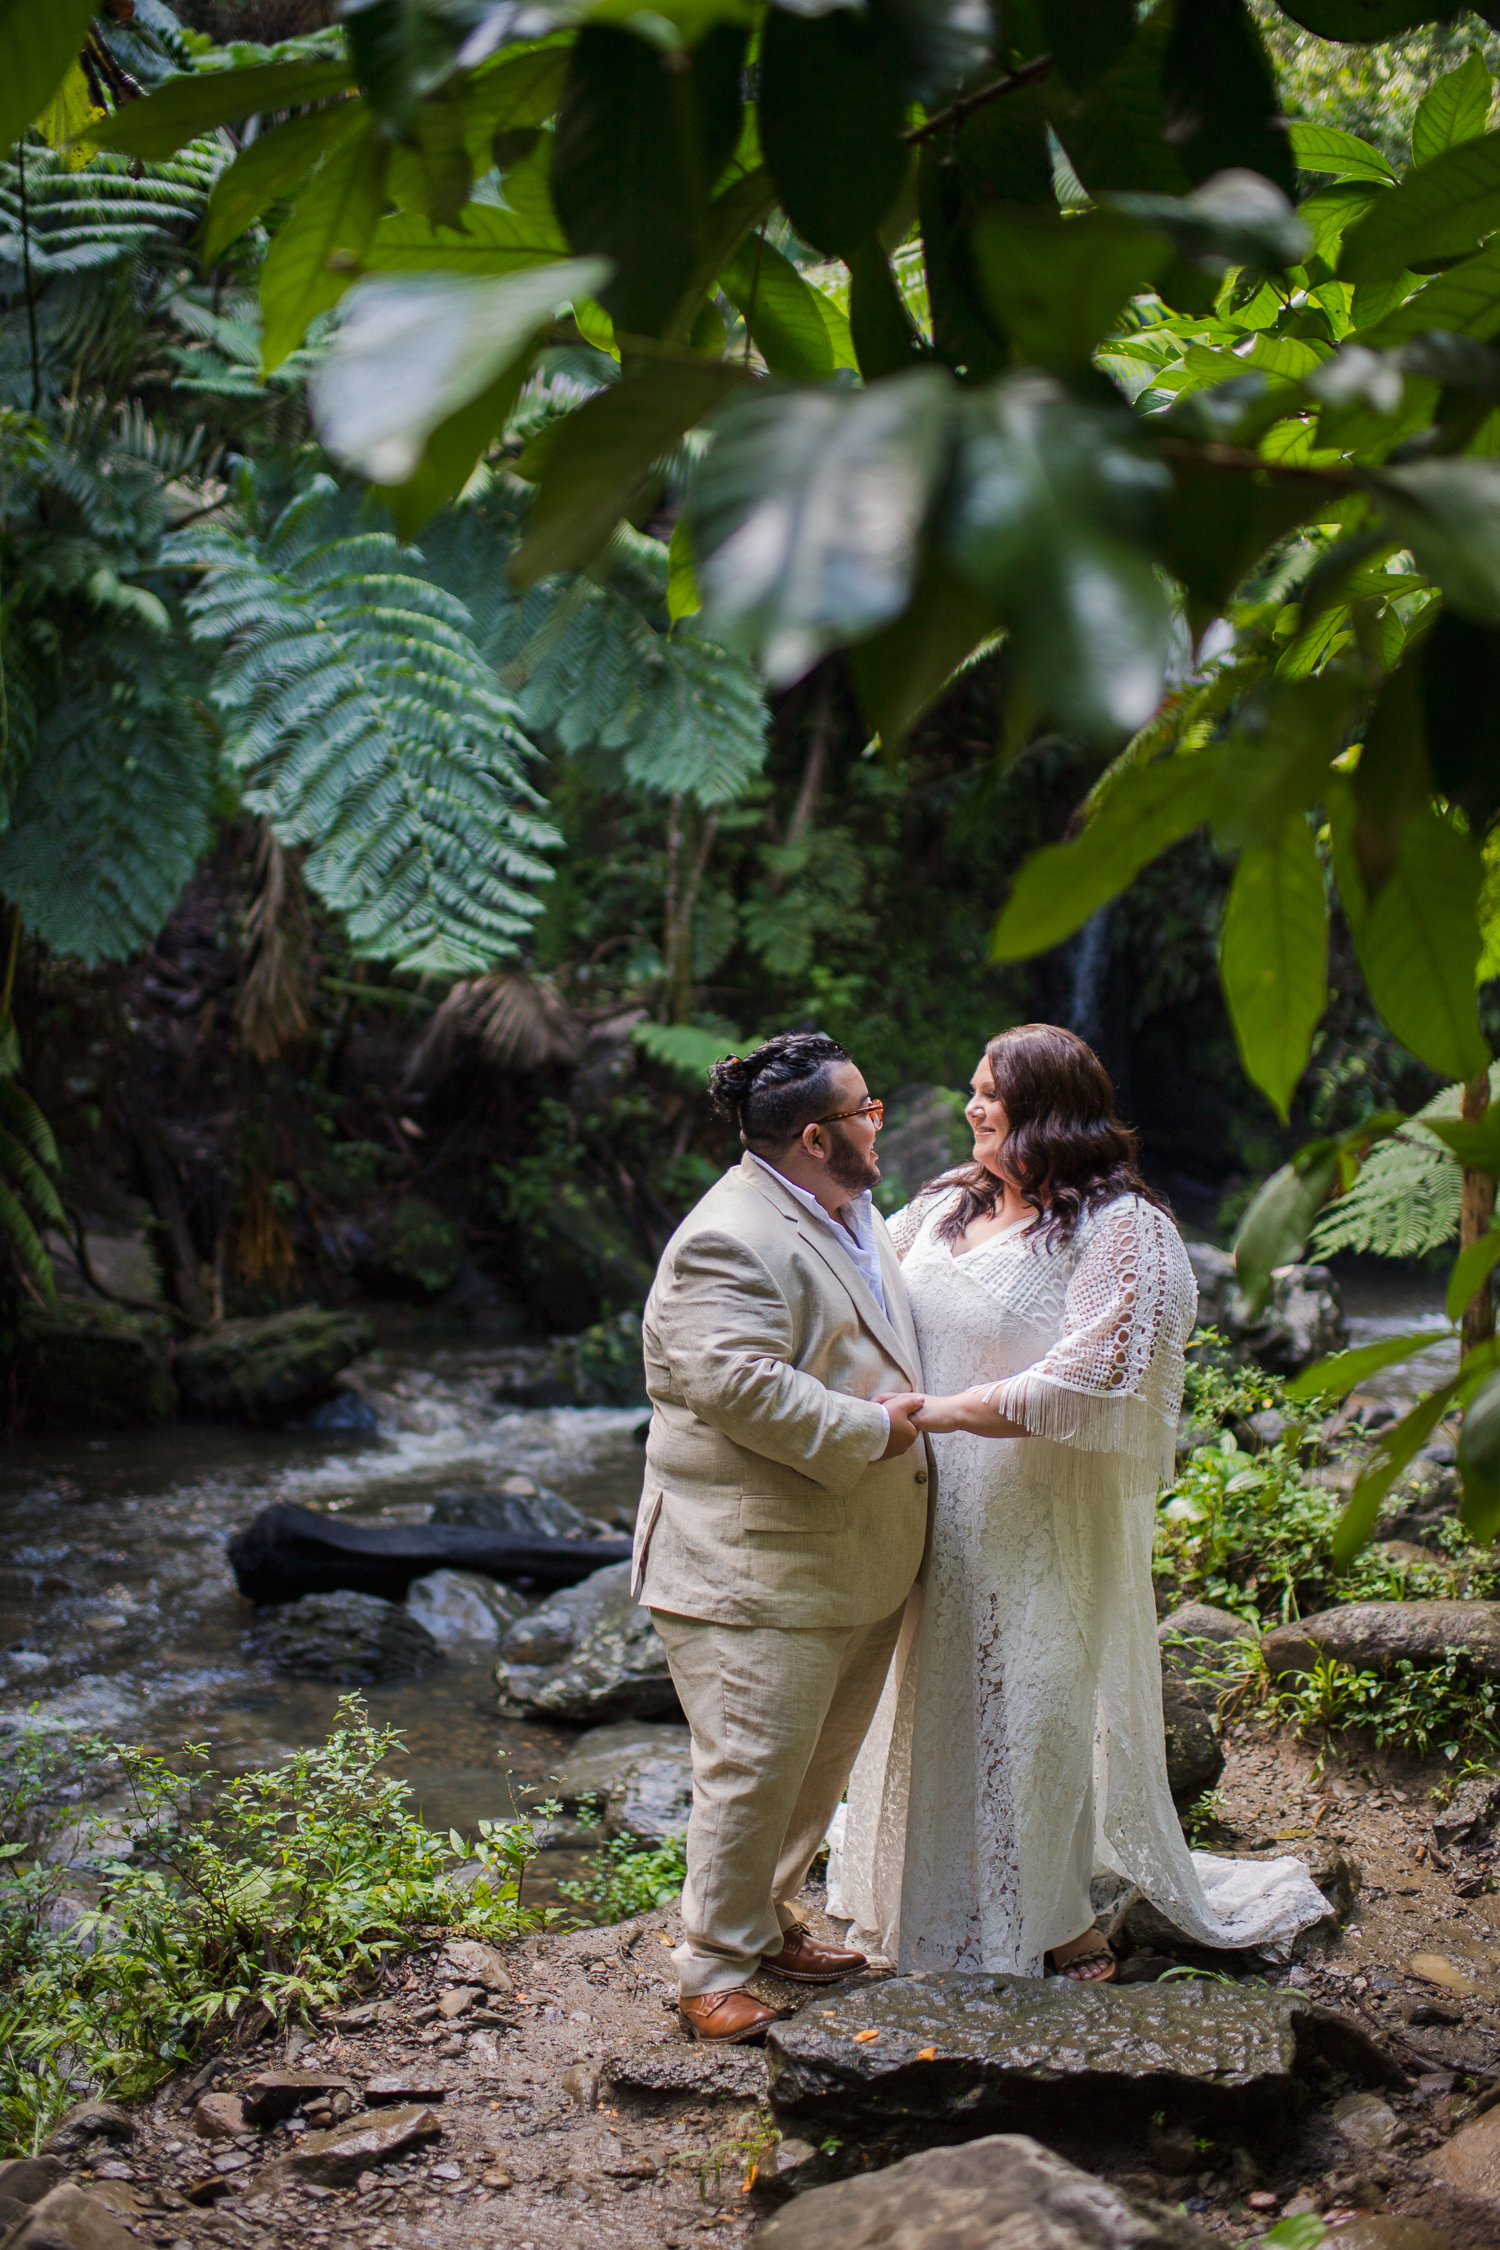 Join Stormee and Asher's romantic El Yunque Rainforest elopement in Puerto Rico. See how they exchanged vows before capturing stunning photos at Hyatt Regency.